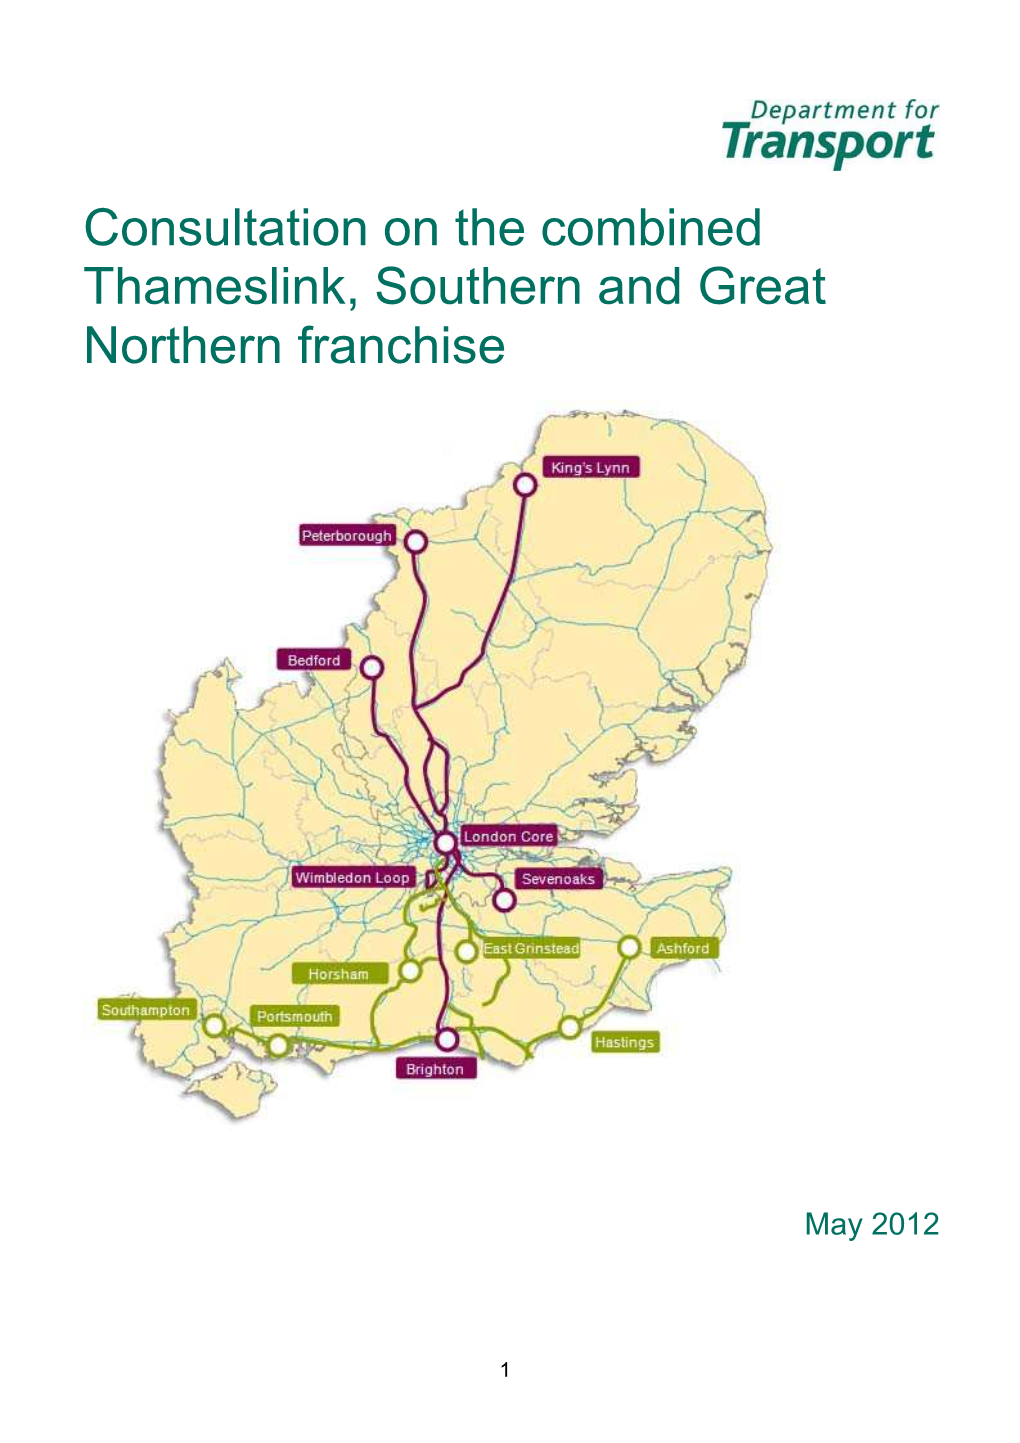 Consultation on the Combined Thameslink, Southern and Great Northern Franchise